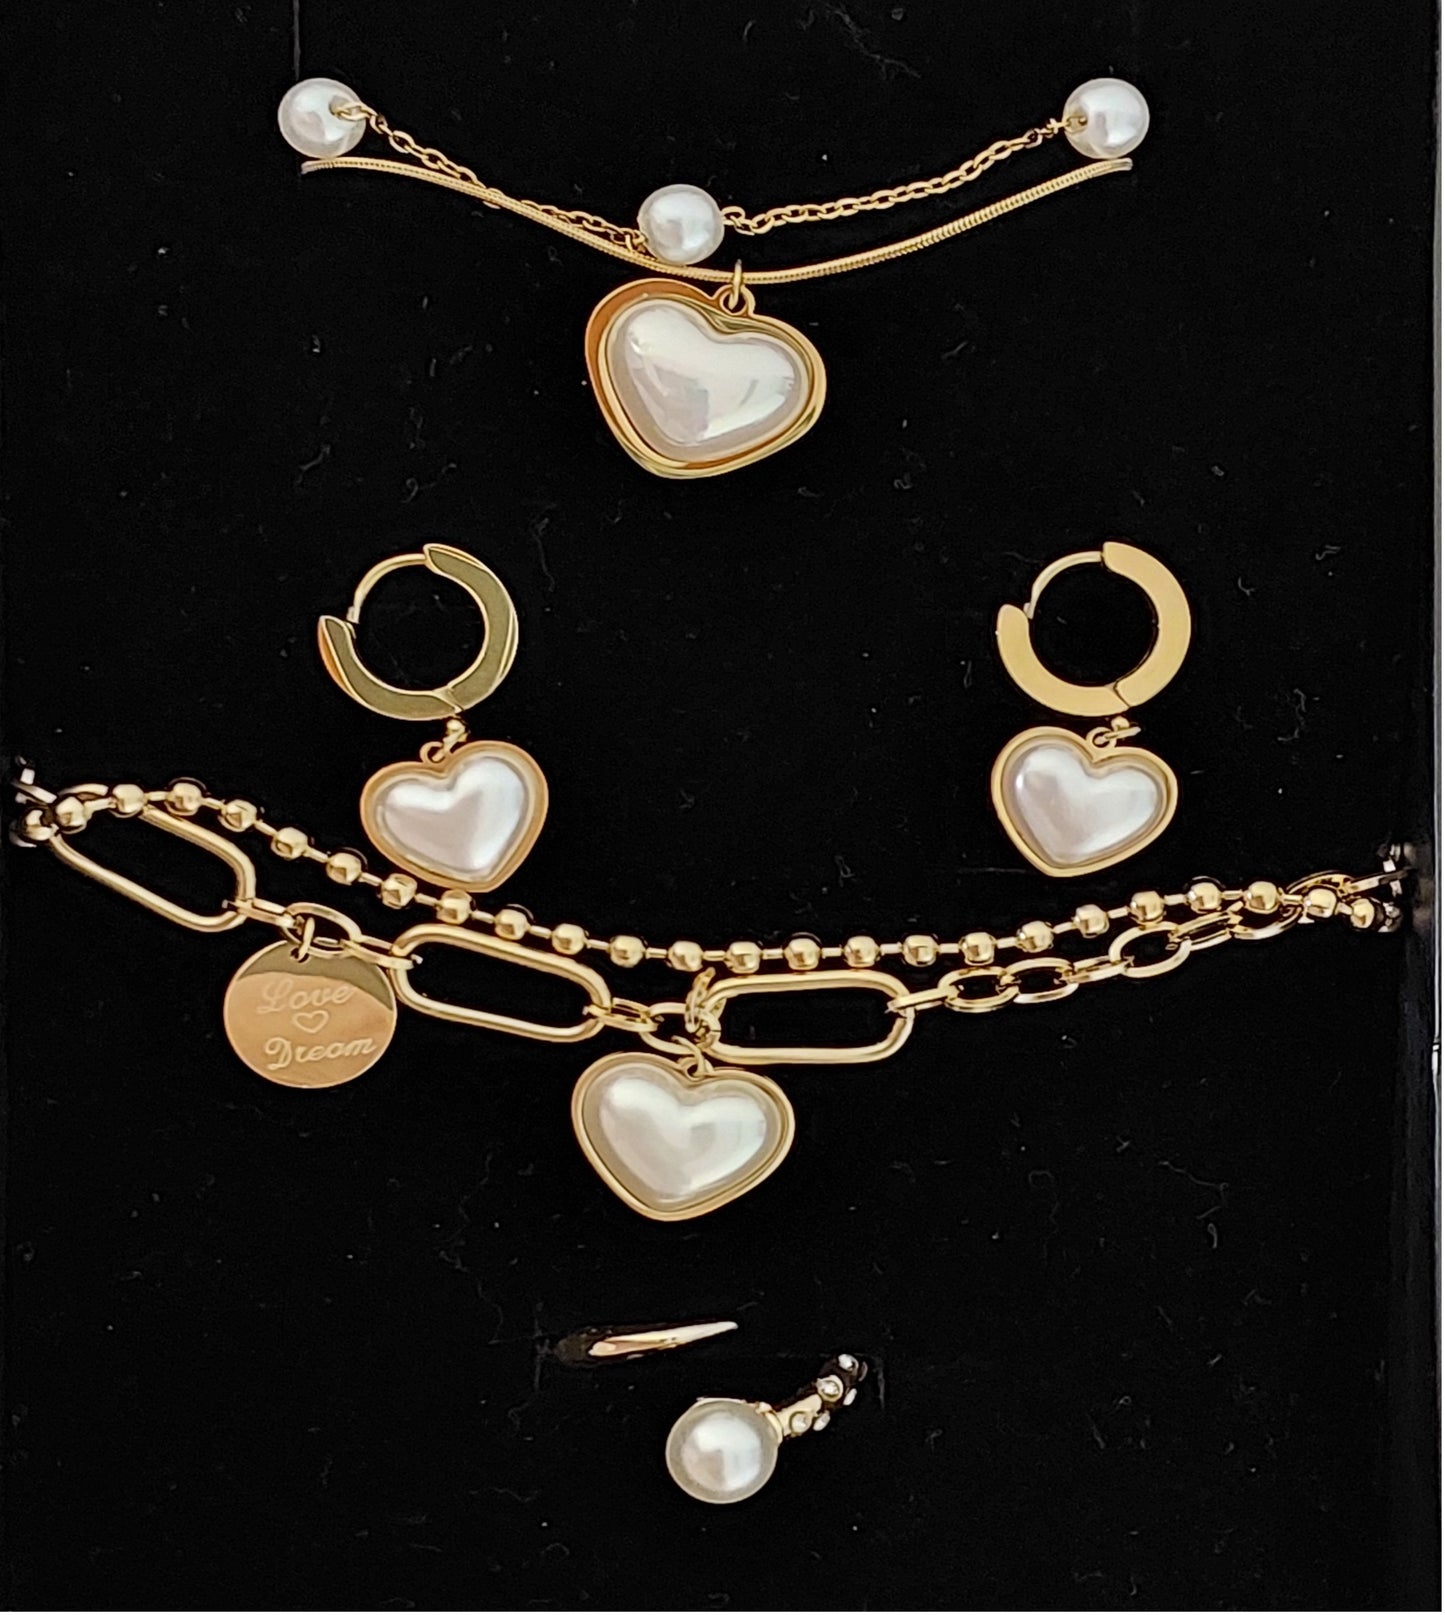 Great Gift Jewelry Set 4 pieces Bracelet Double Layered Necklace Earrings Ring Pearl Heart Love Shape Gold Colour